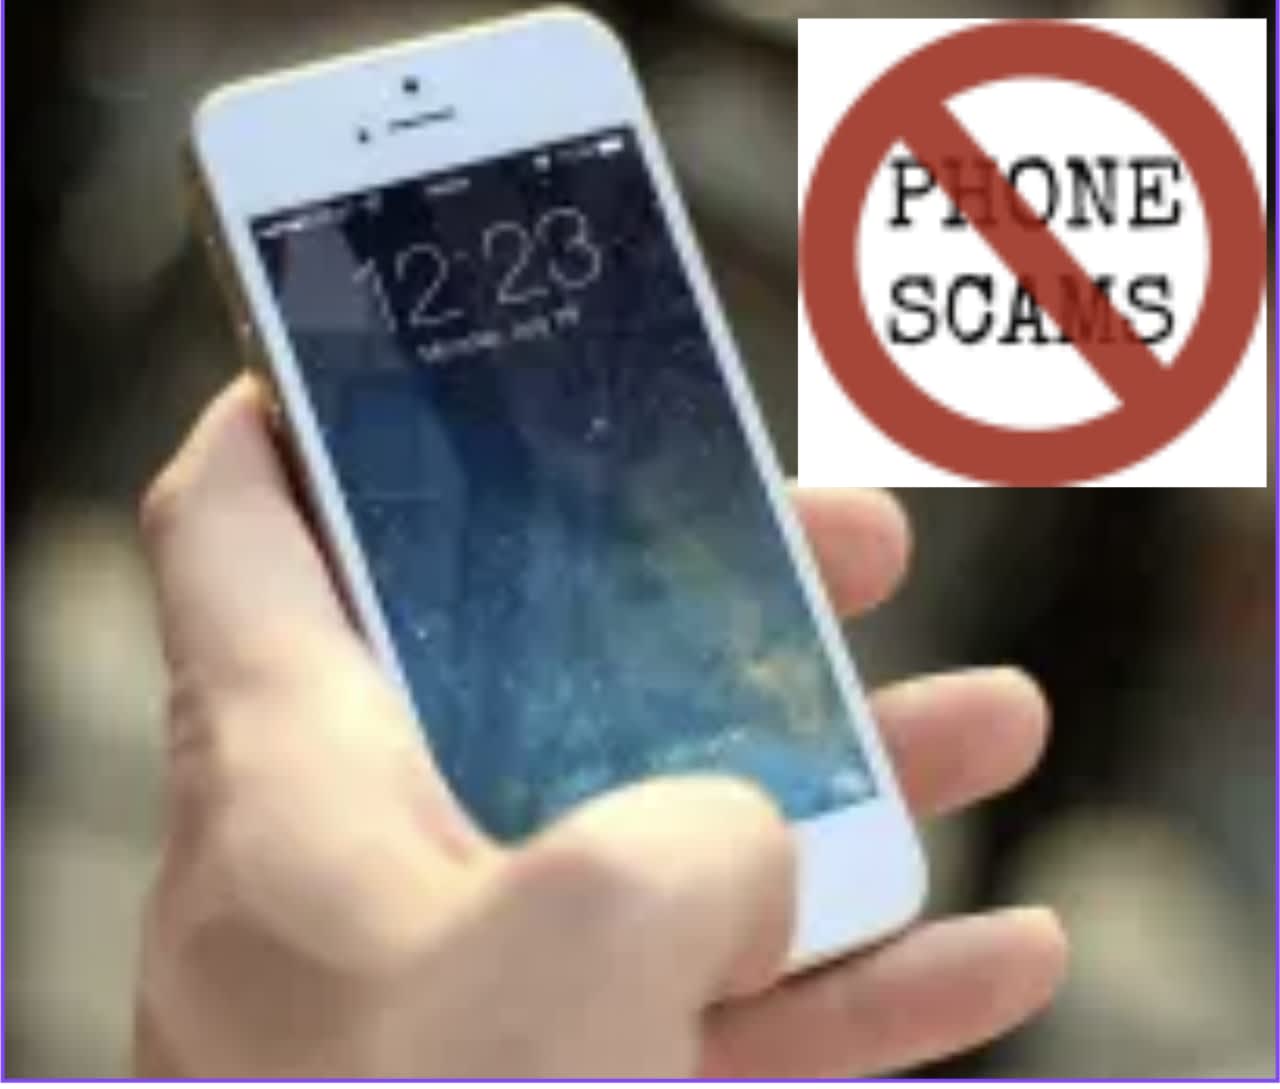 The Putnam County Sheriff's Office is warning of an increase in phone scams.